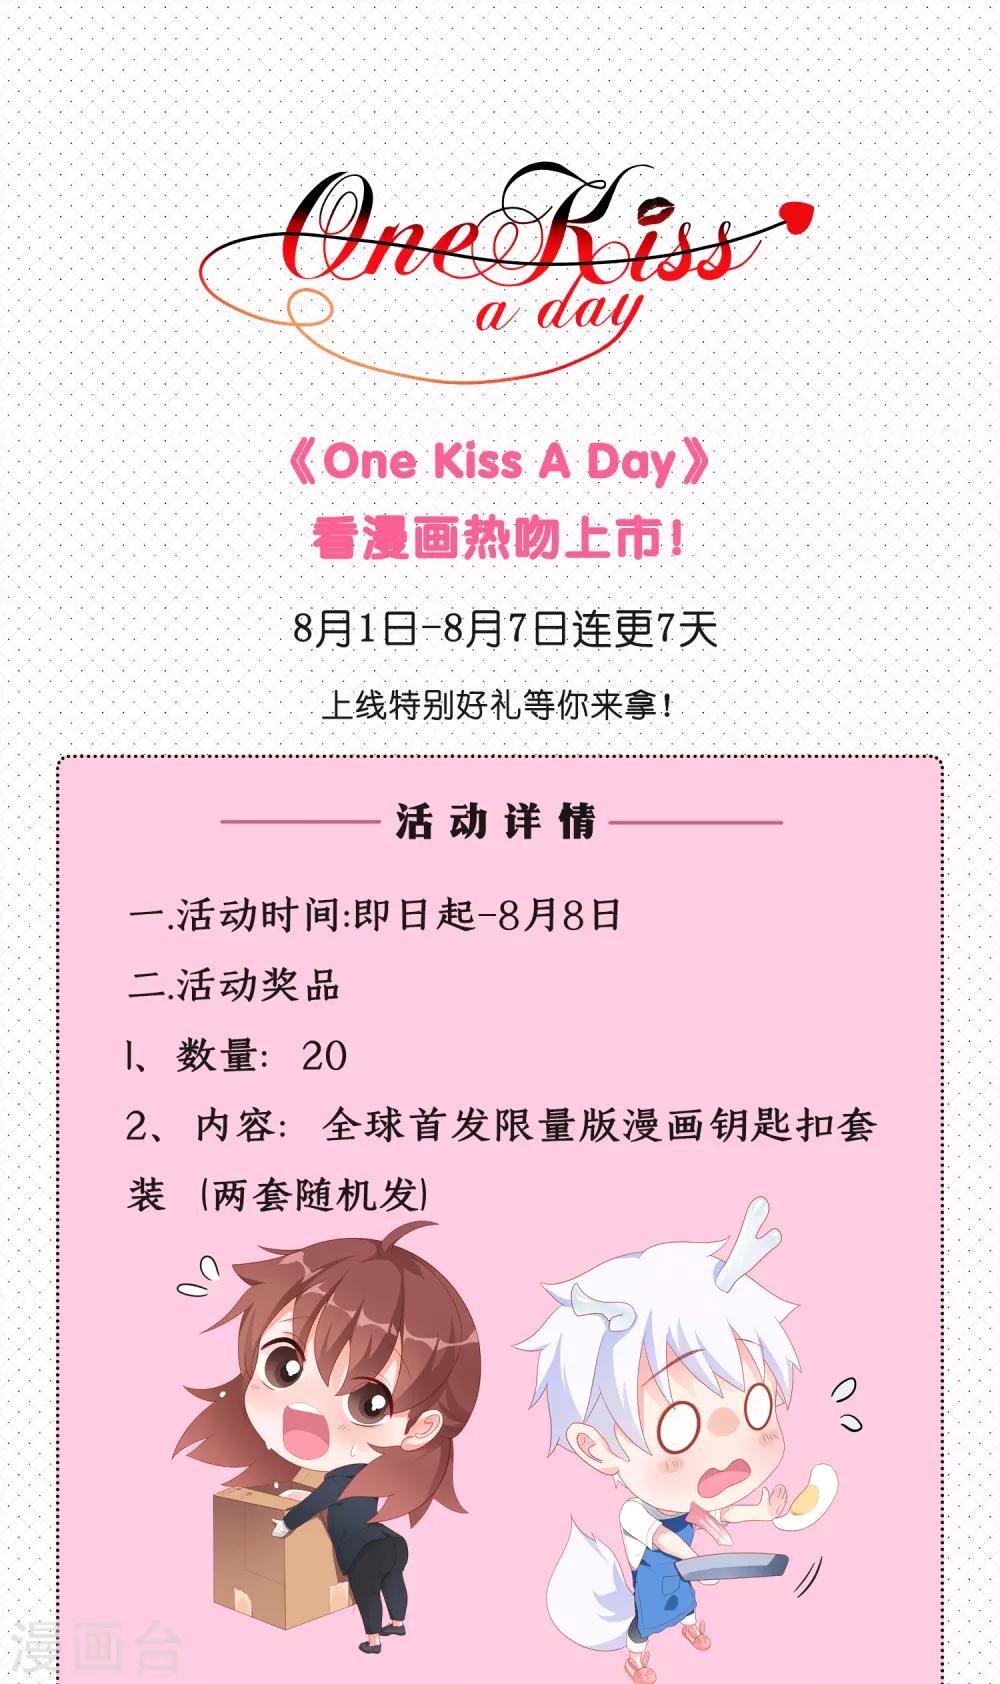 One Kiss A Day - 預告 - 3